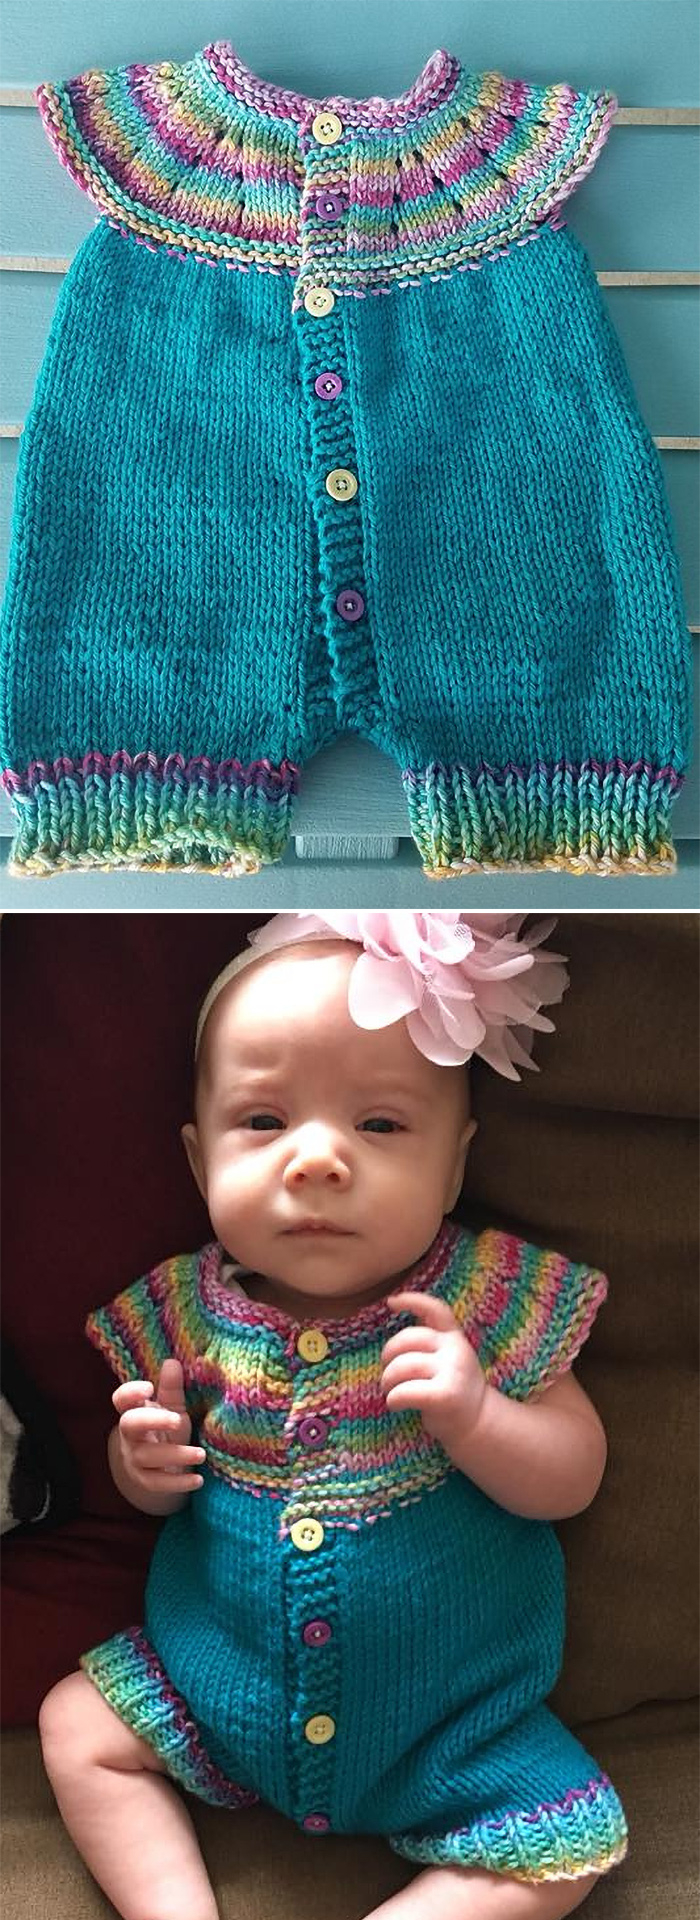 Free Knitting Patterns For Baby Sets Ba Onesie And Romper Knitting Patterns In The Loop Knitting